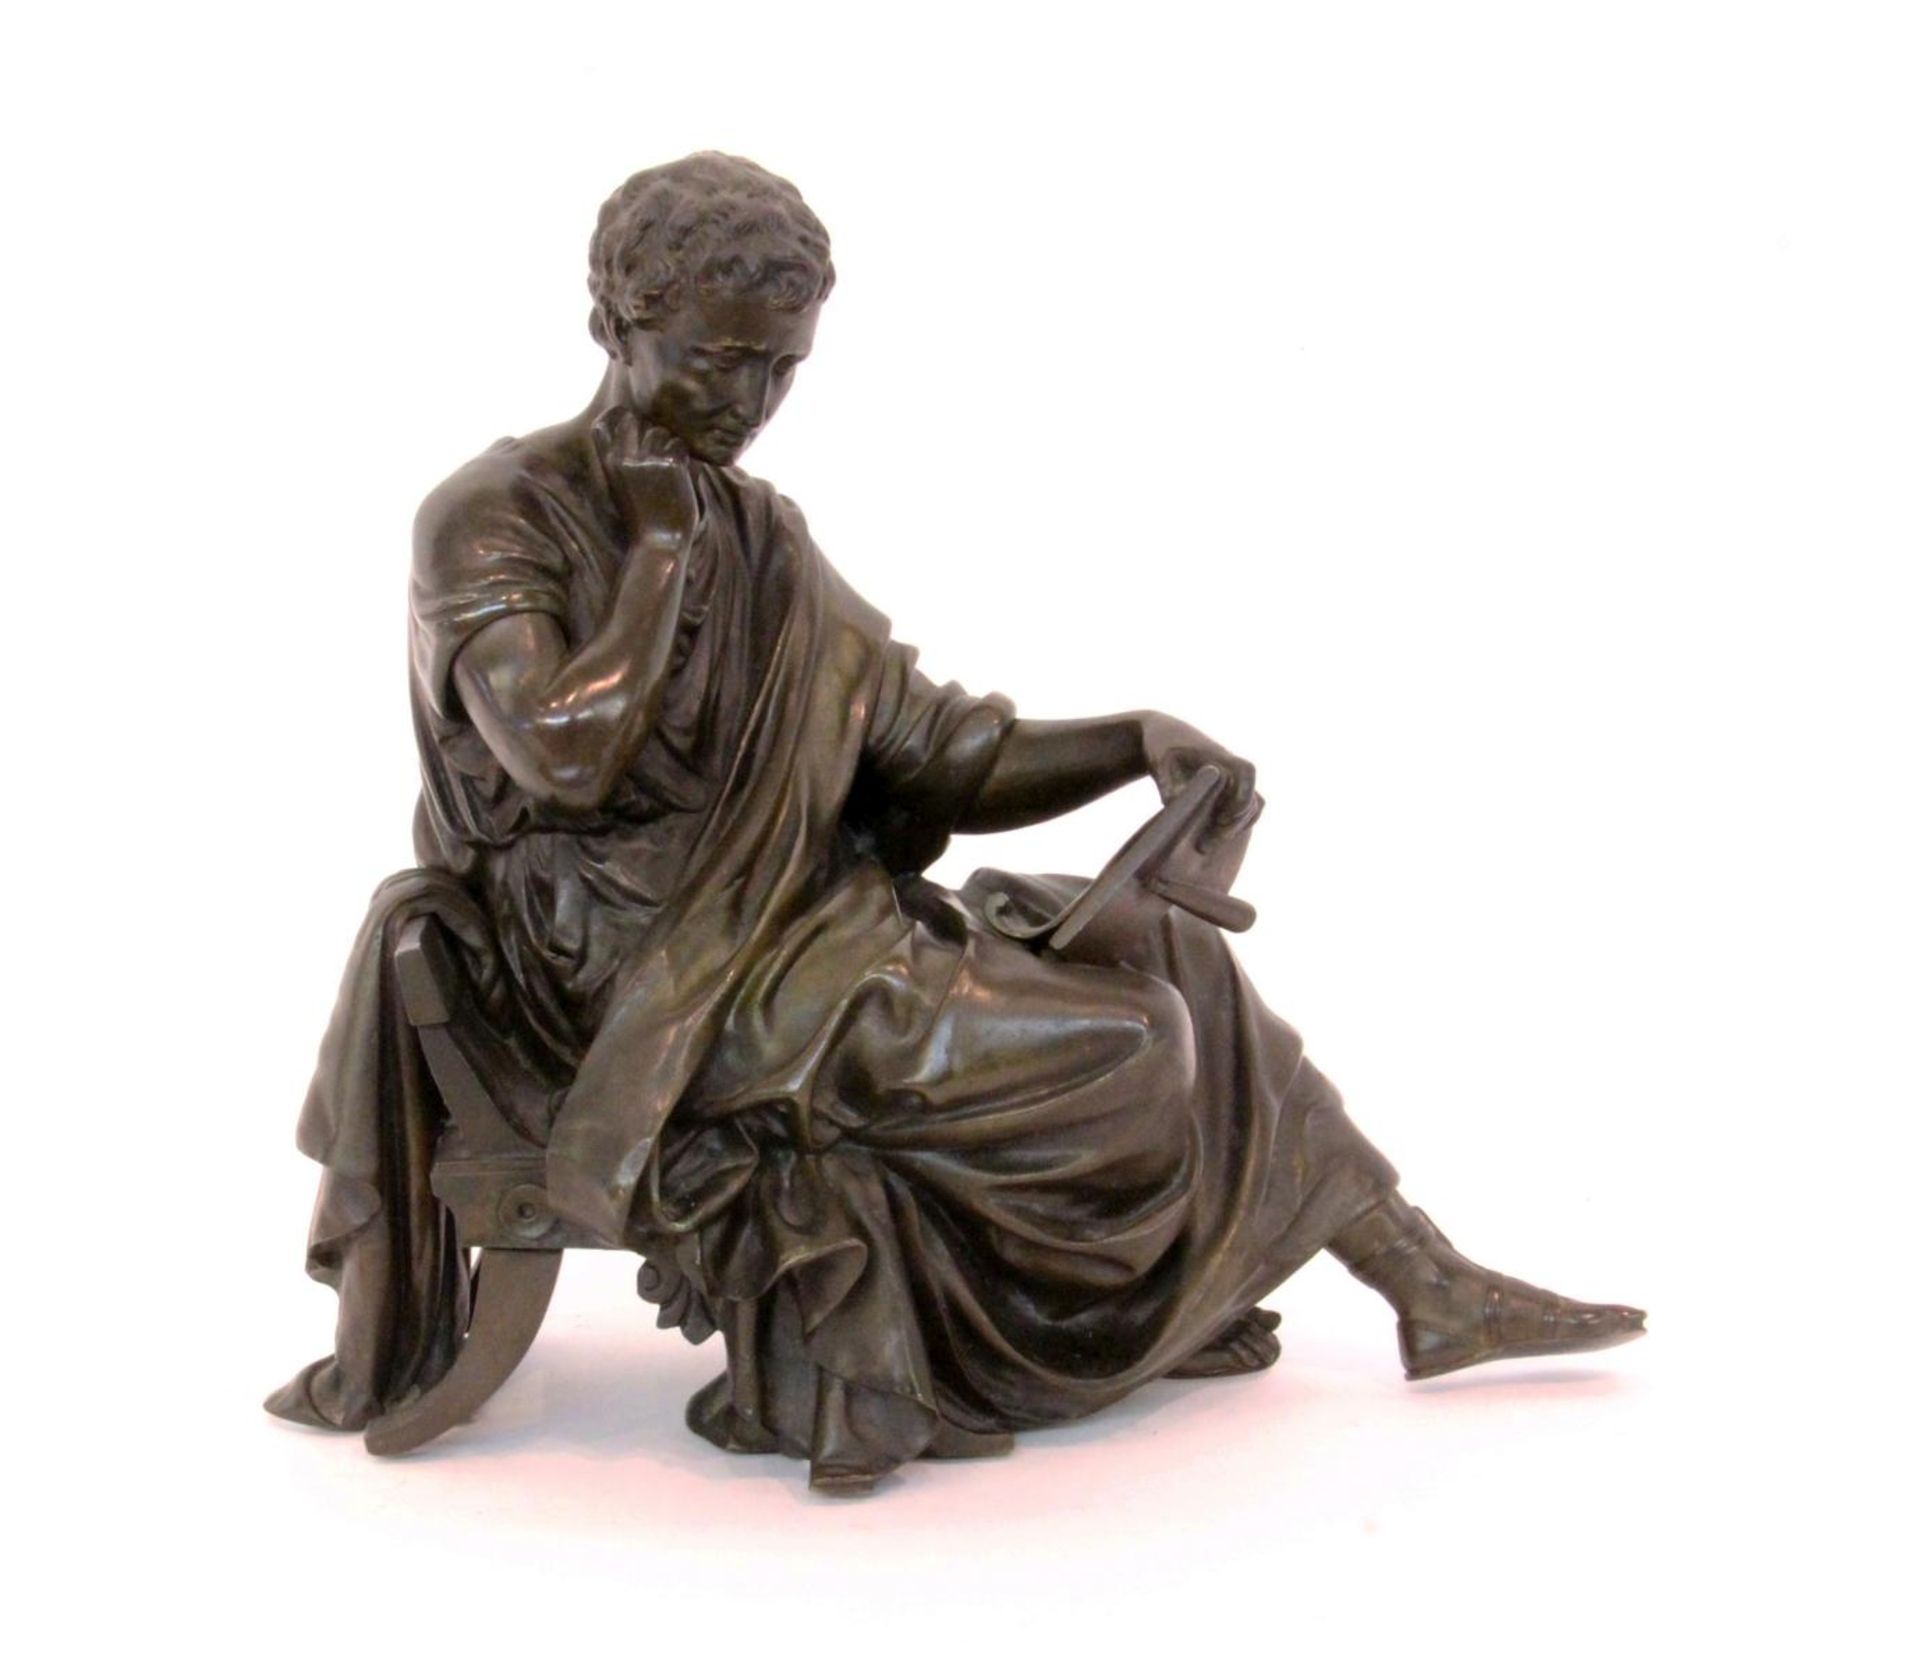 A PHILOSOPHER France circa 1900 Patinated bronze figure of an ancient philosopher reading